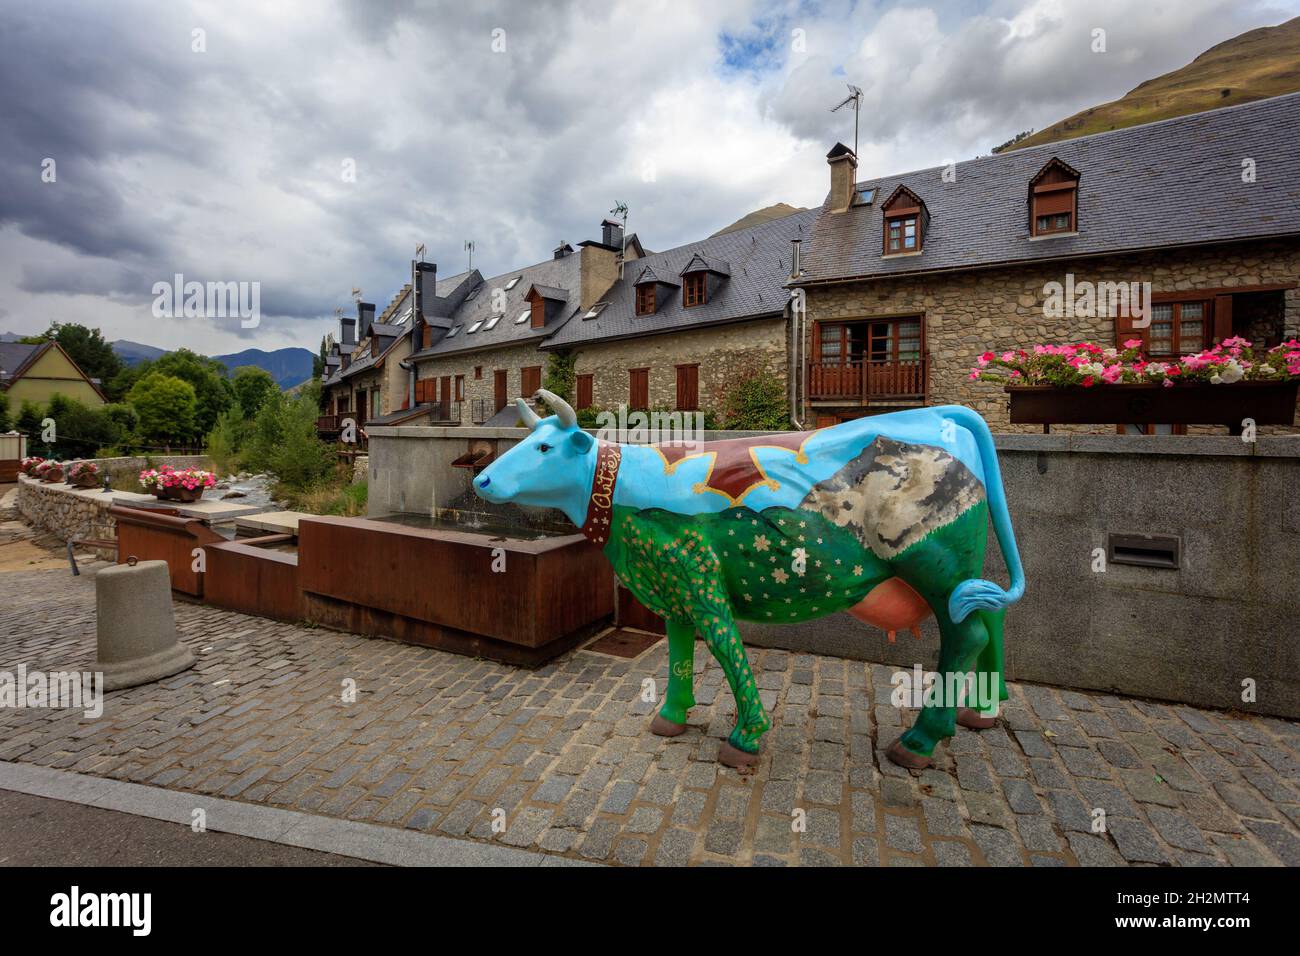 A fiberglass statue of a cow in the streets of Arties, a village in the Aran Valley. Catalonia. Spain. Stock Photo